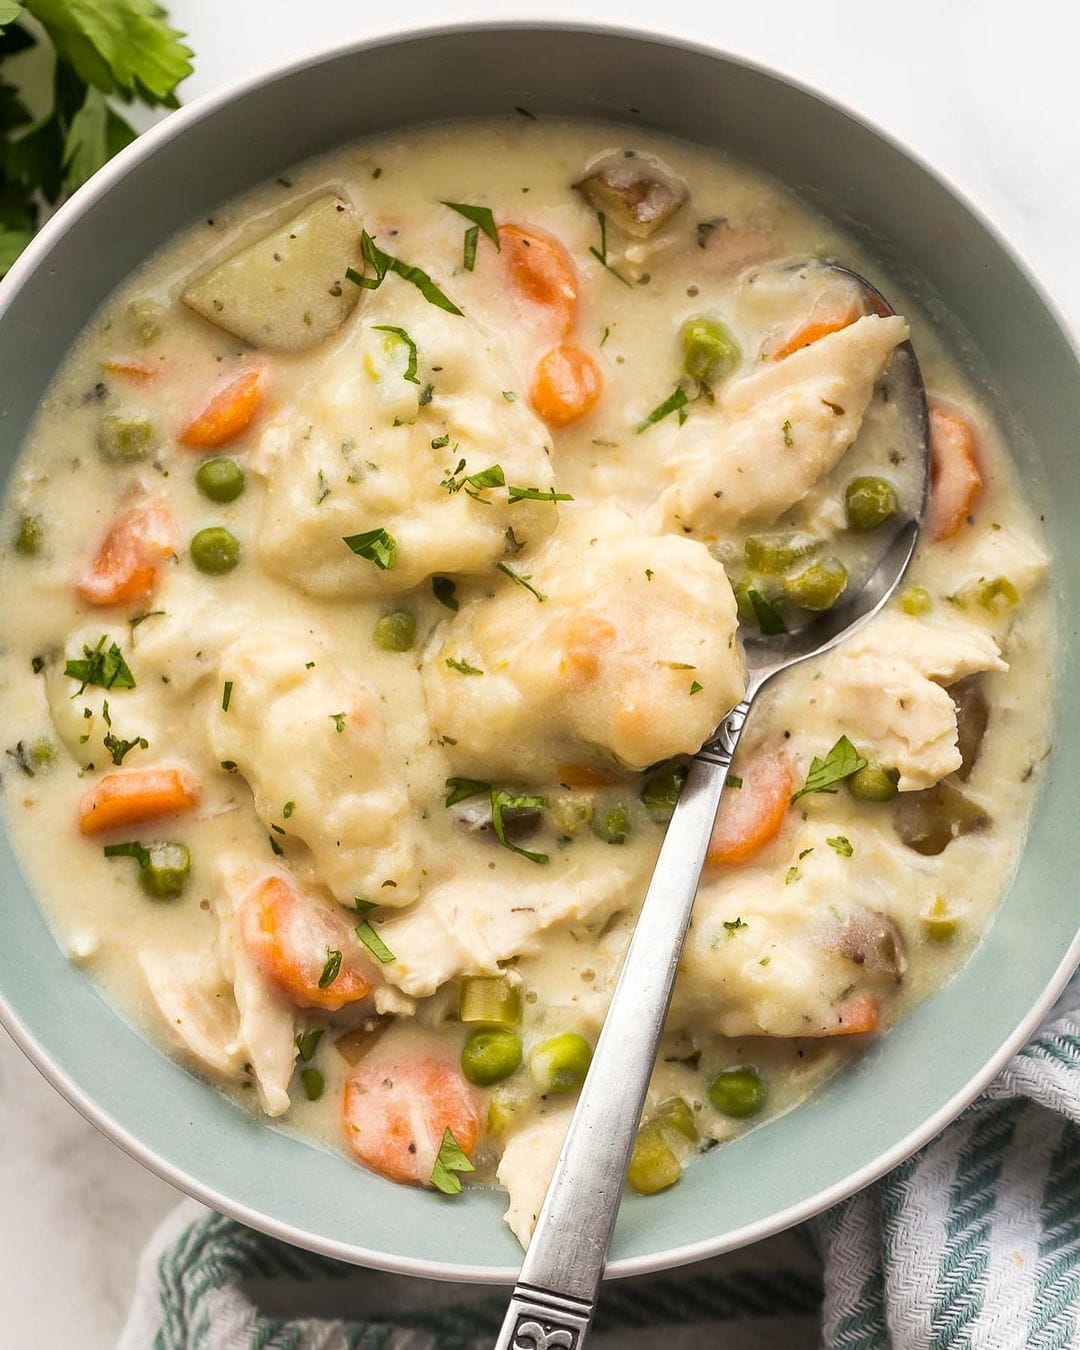 A photo of Chicken and Dumplings by Ashley Fehr